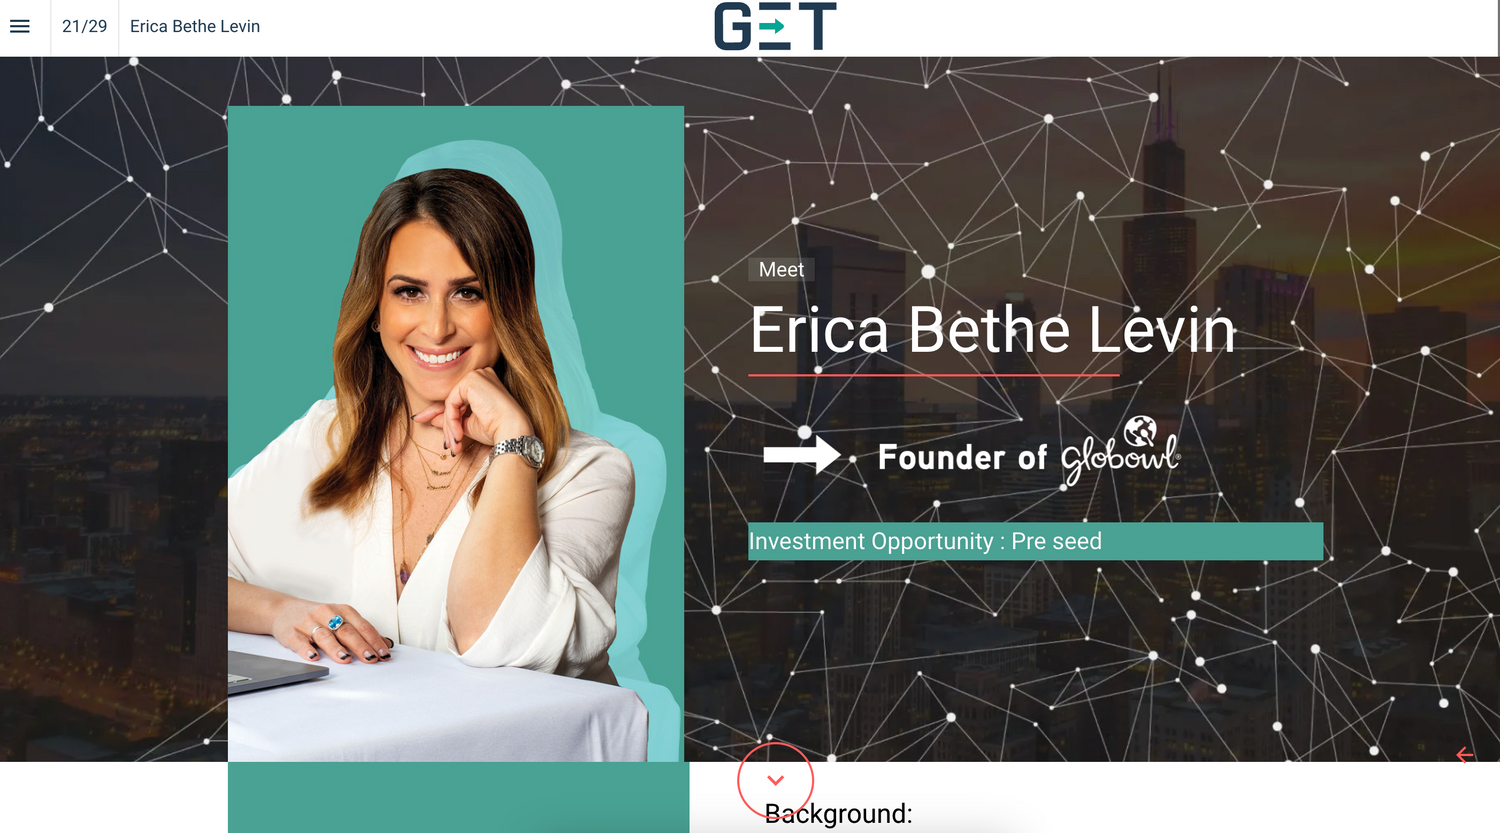 GET Cities Chicago Interview- About Erica Bethe Levin